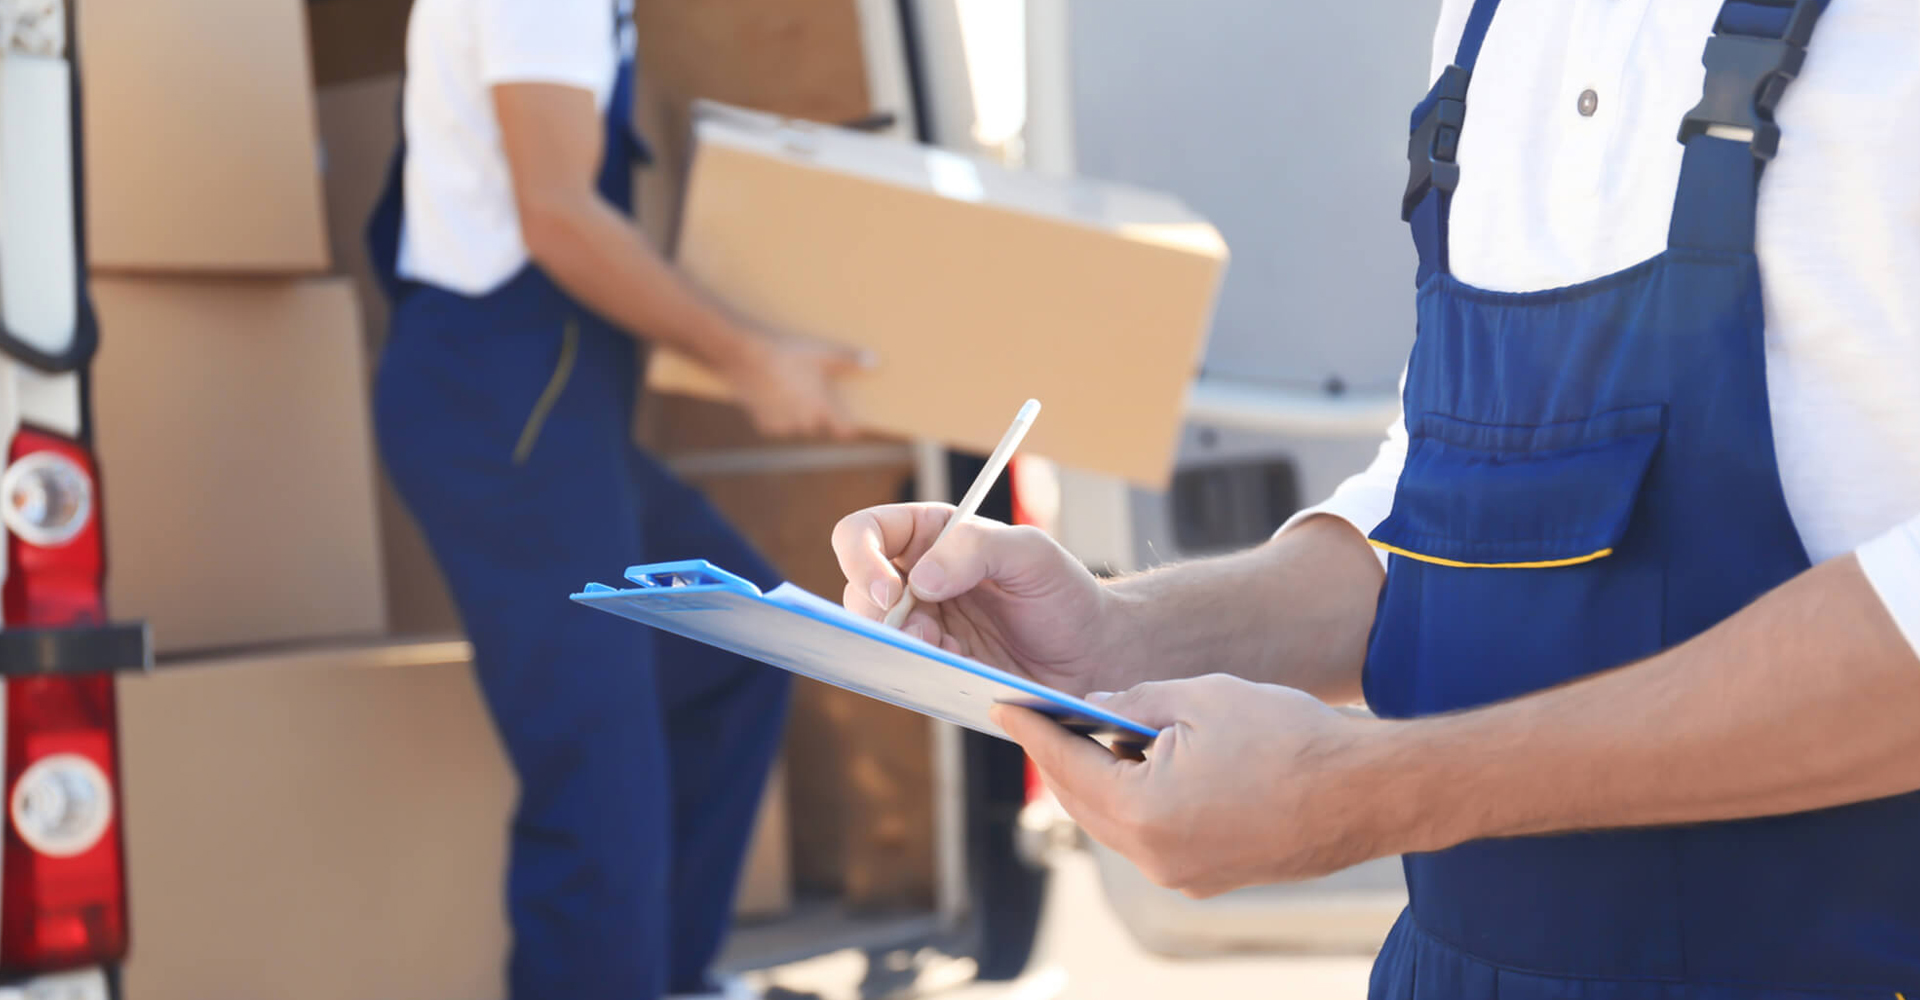 Schedule an onsite consult from a Great Movers expert